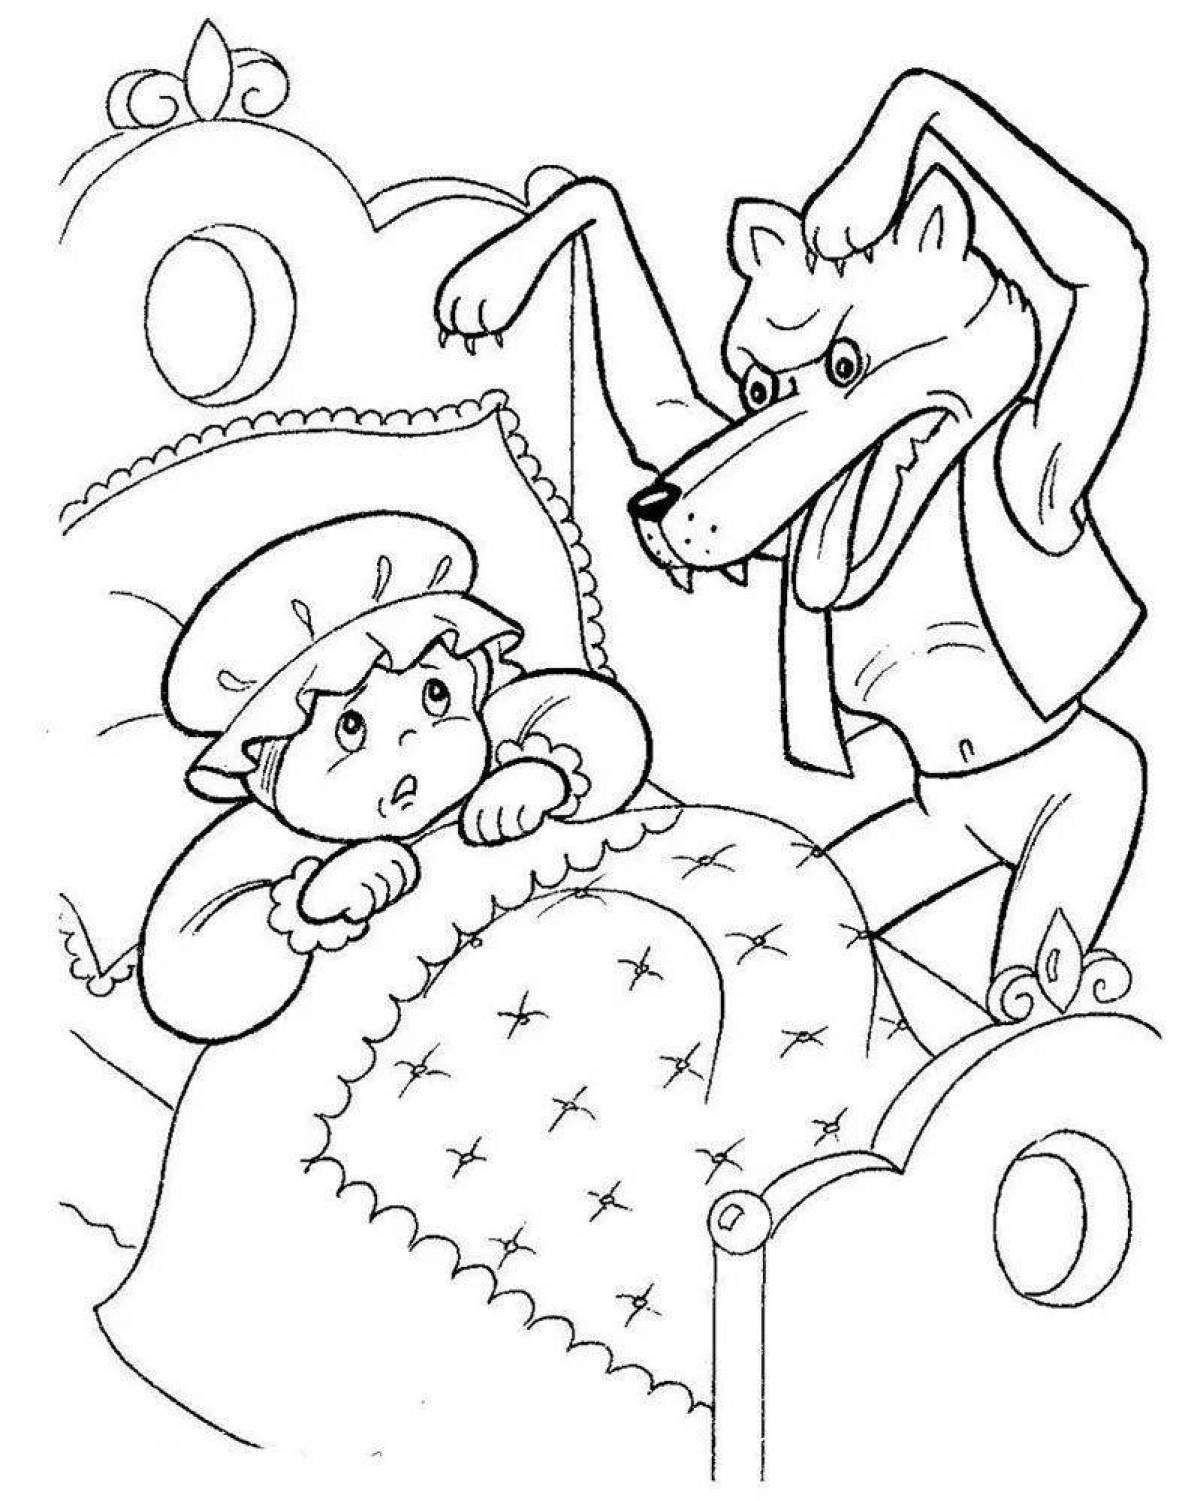 Coloring book magical gray wolf and little red riding hood